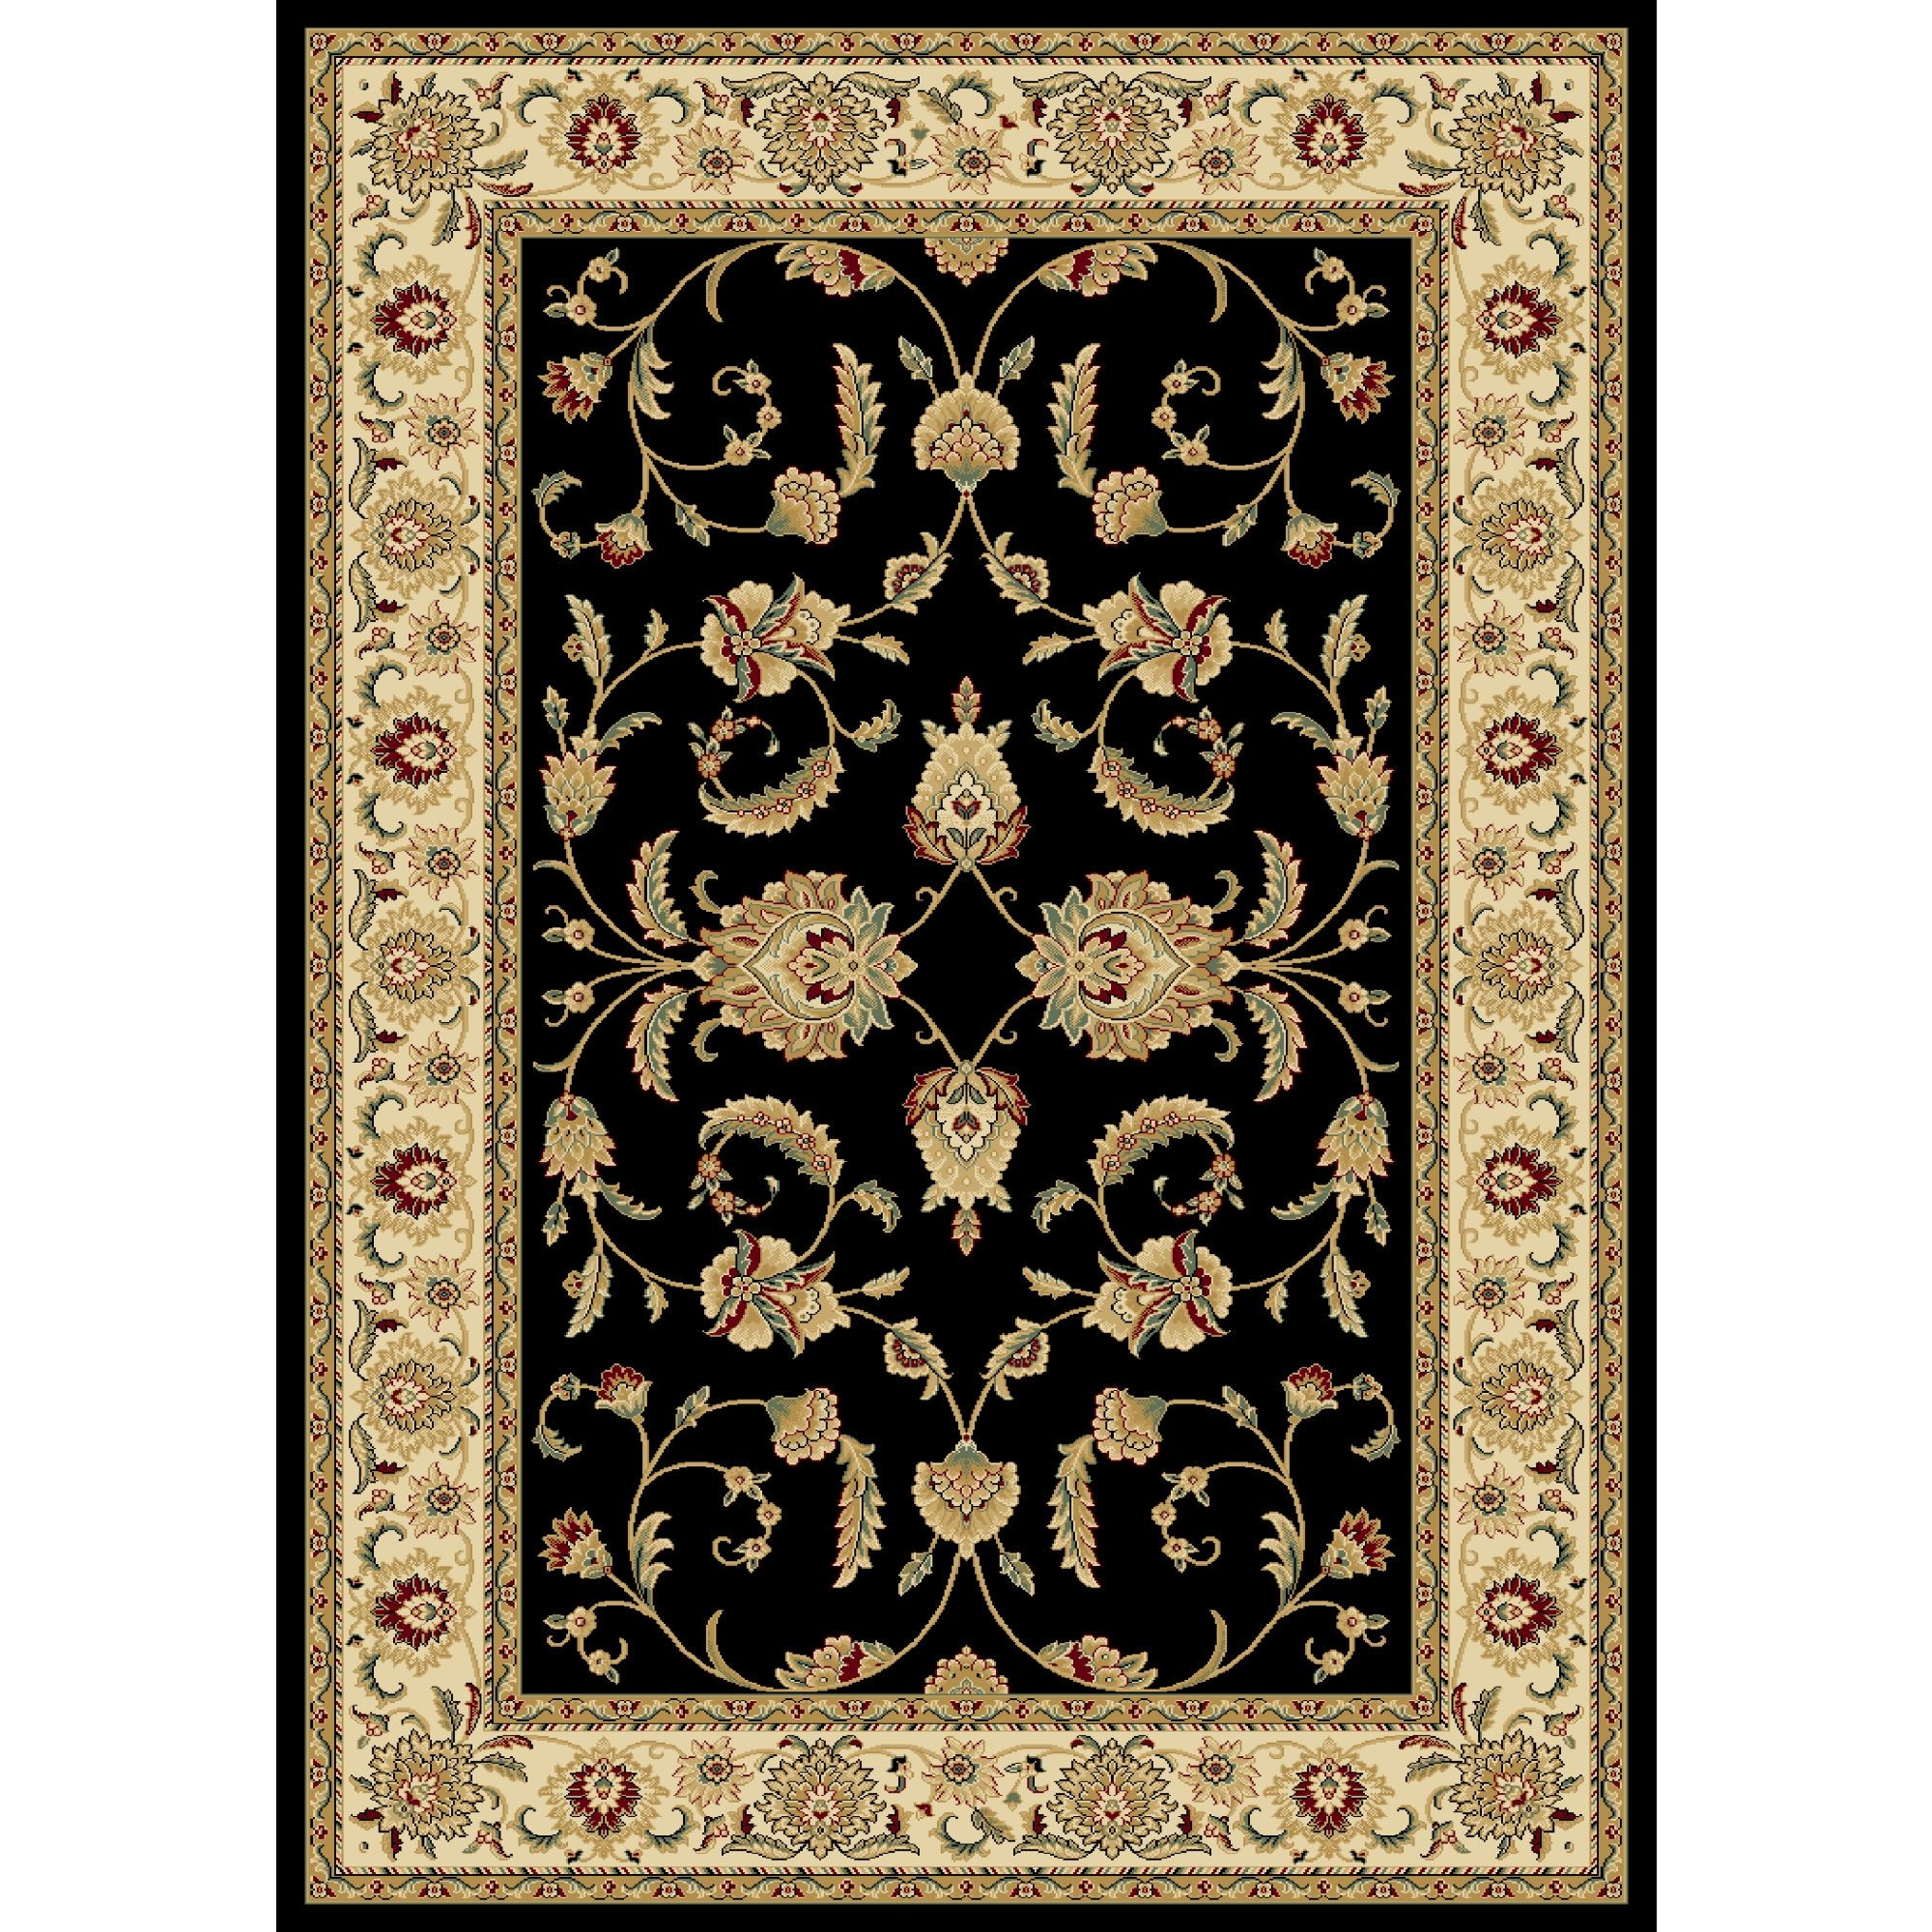 Black Oriental Rugs Home Decors Collection Intended For Black And Gold Oriental Rugs (View 3 of 15)